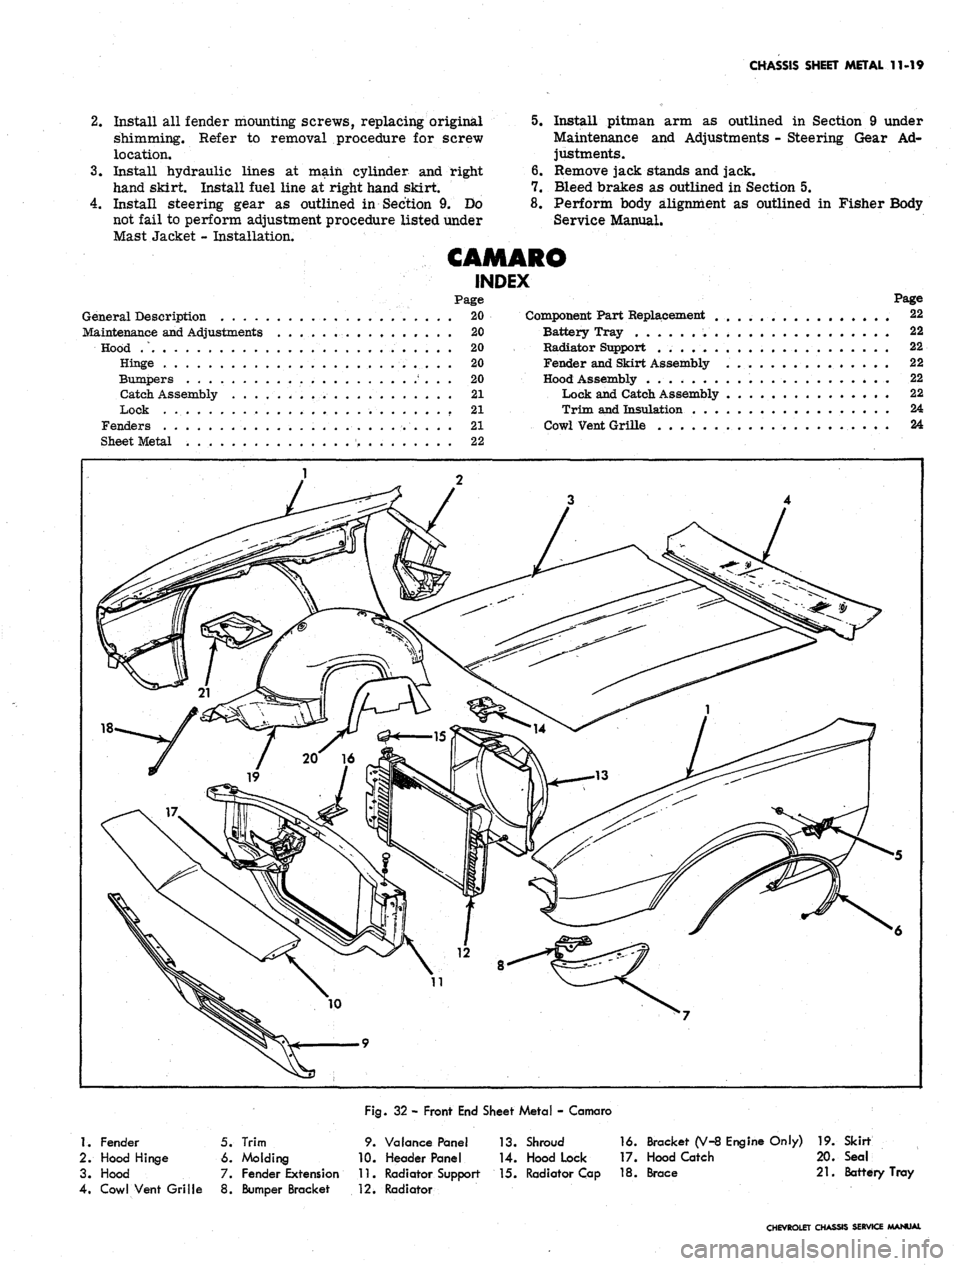 CHEVROLET CAMARO 1967 1.G Chassis Workshop Manual 
5.

6.

7.

8.
2.
 Install all fender mounting screws, replacing original

shimming. Refer to removal procedure for screw

location.

3.
 Install hydraulic lines at main cylinder and right

hand skir